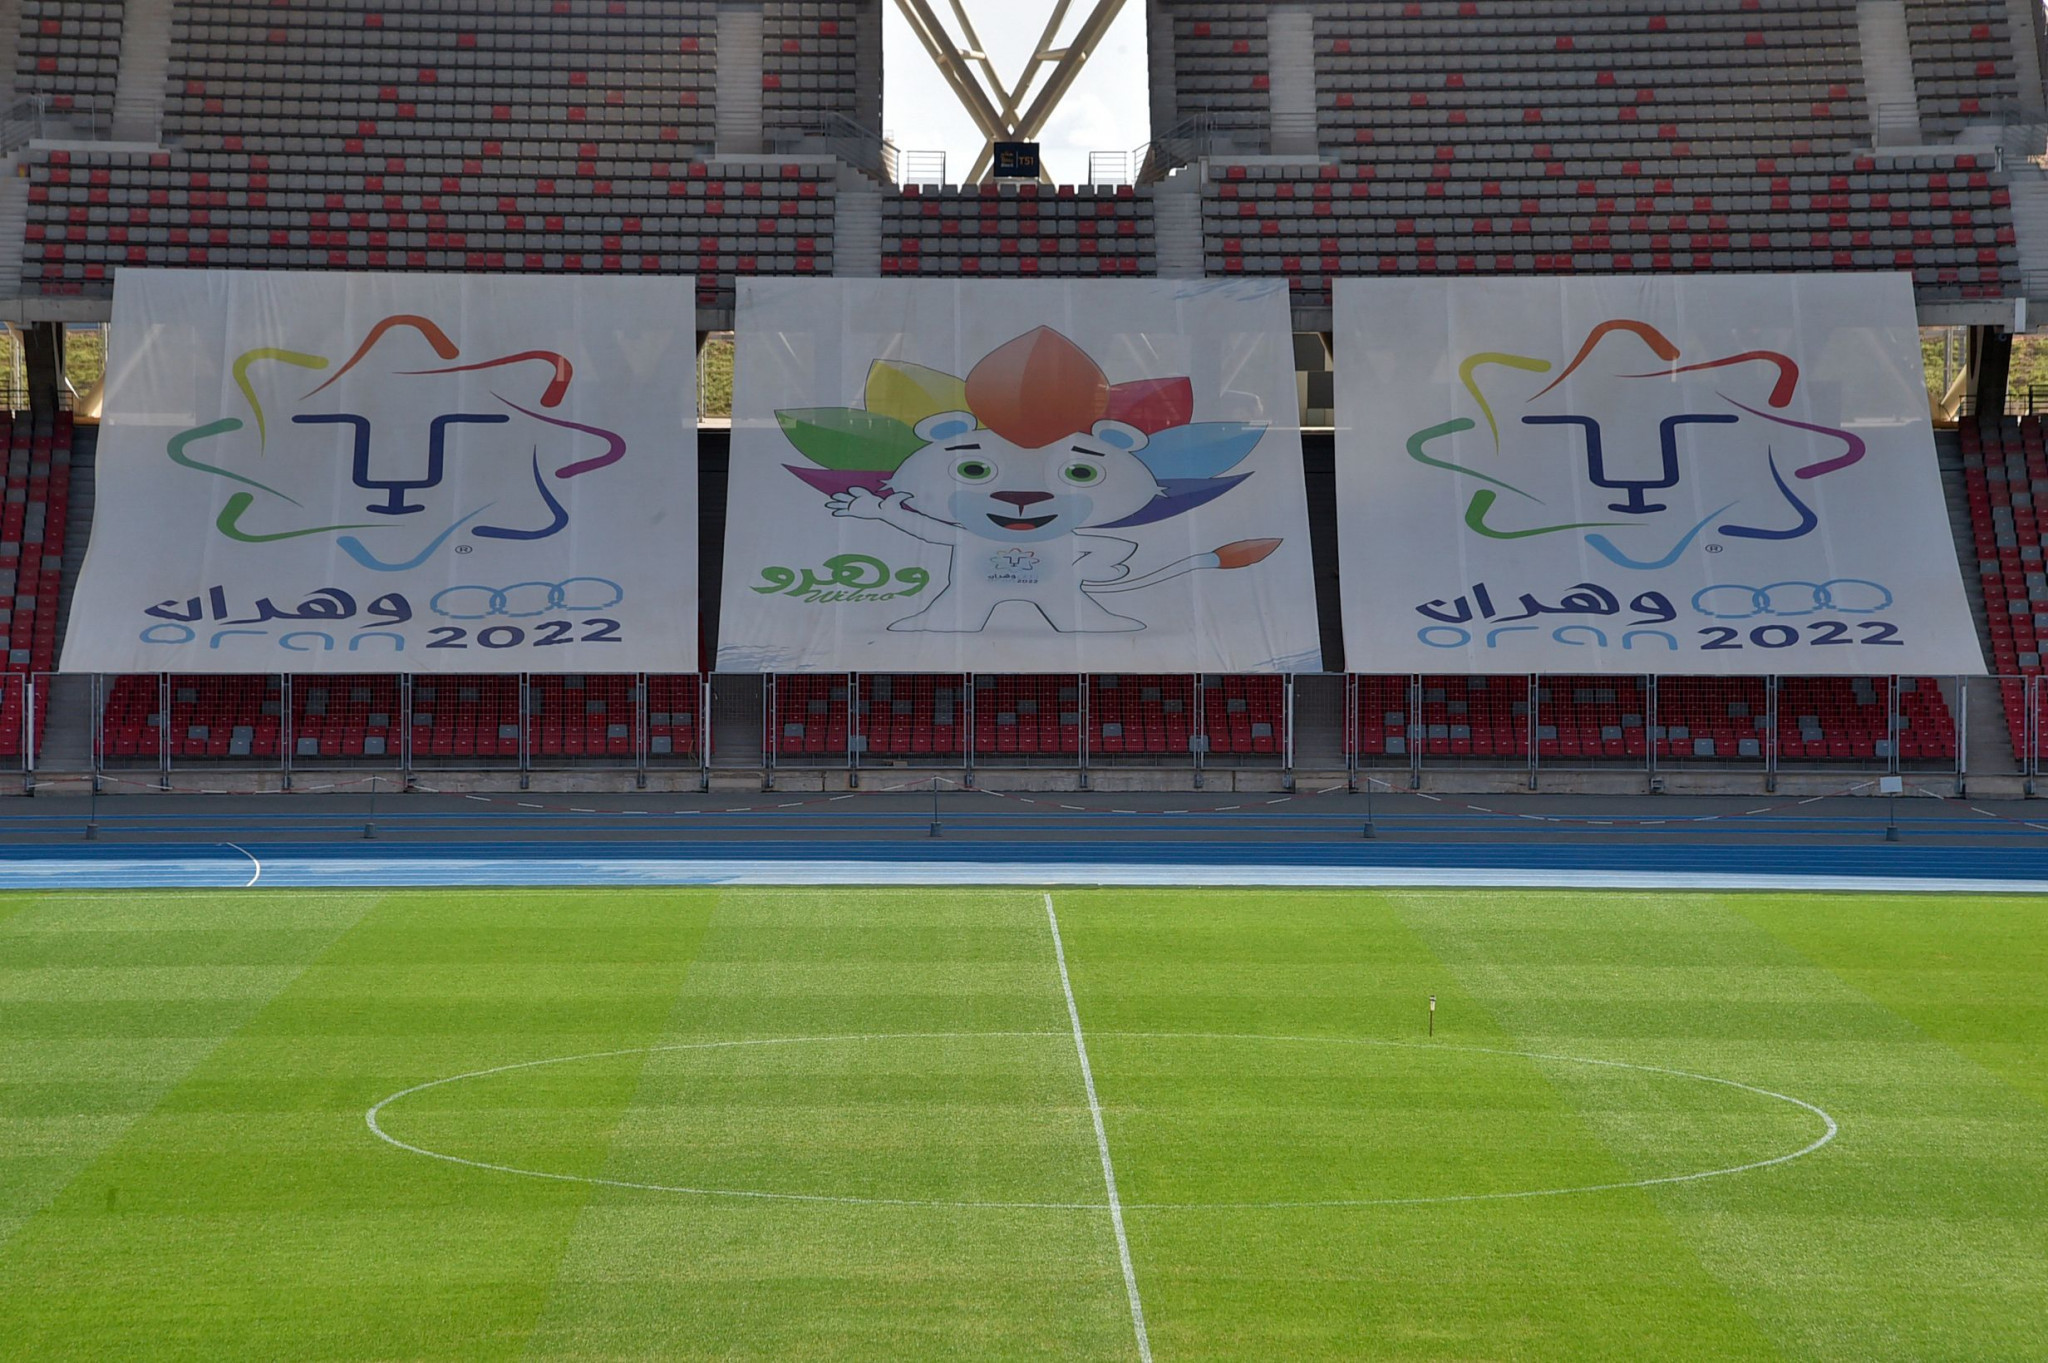 The Mediterranean Games in the Algerian city of Oran are scheduled for June 25 to July 5 ©Getty Images